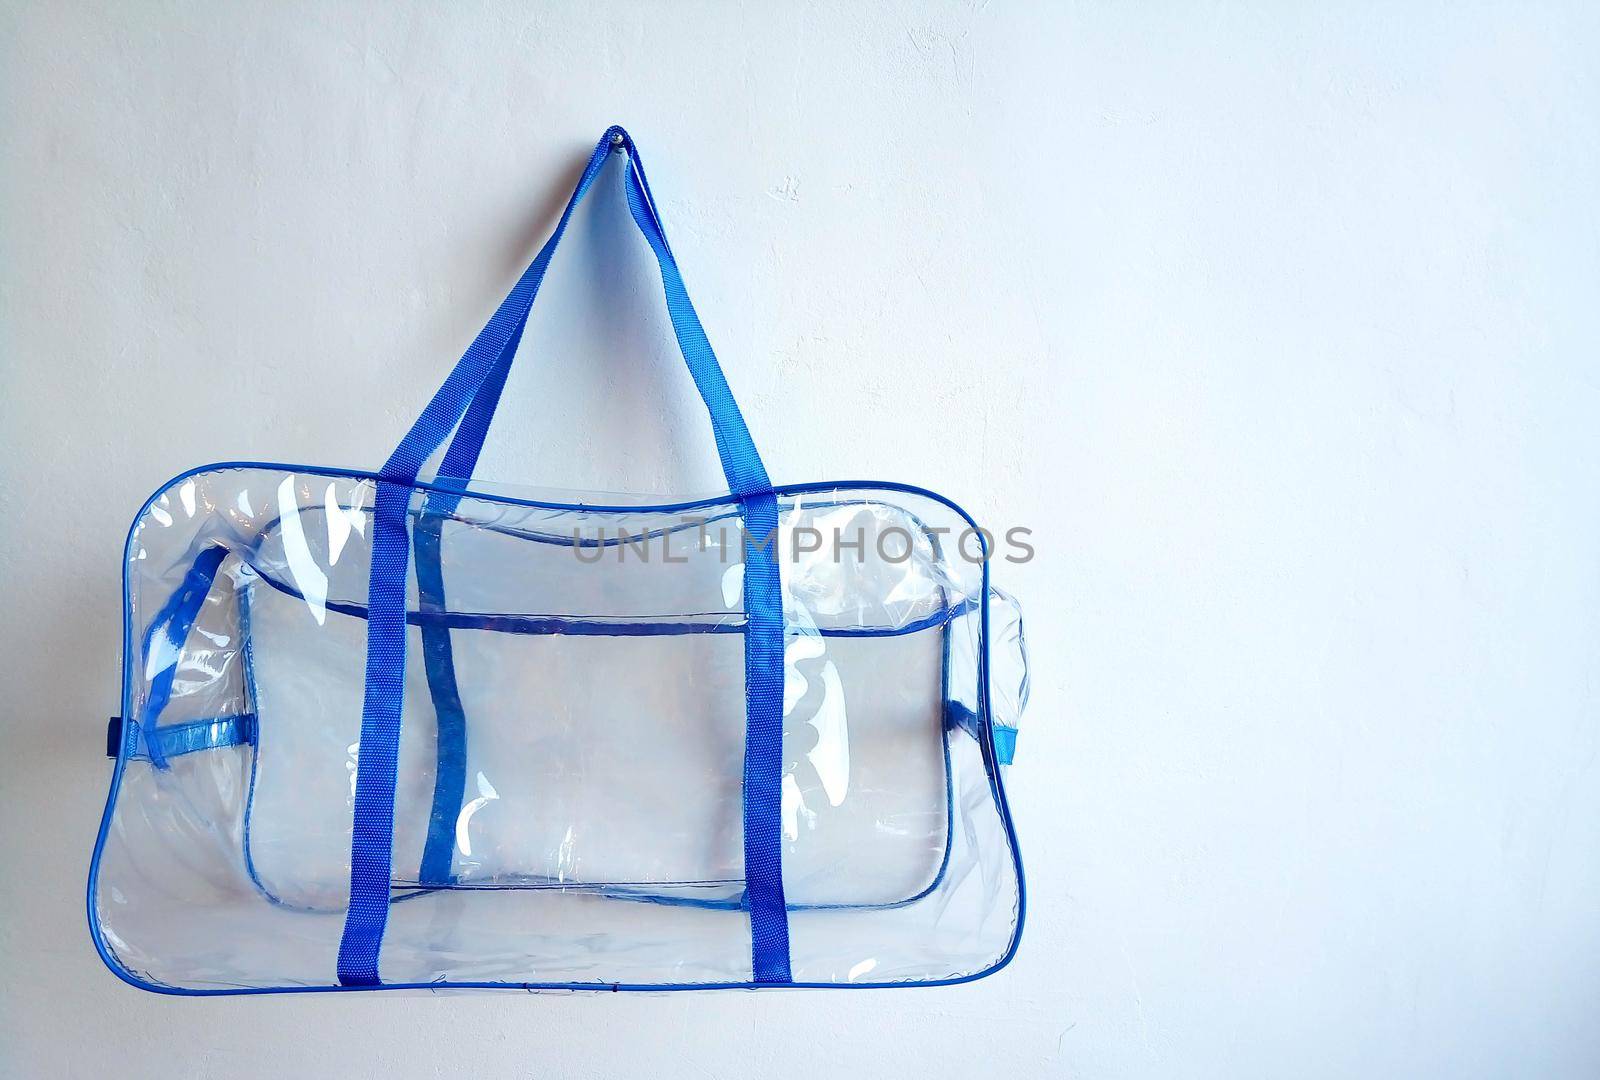 Plastic bag with blue handles hanging on a nail, on a white background by lapushka62